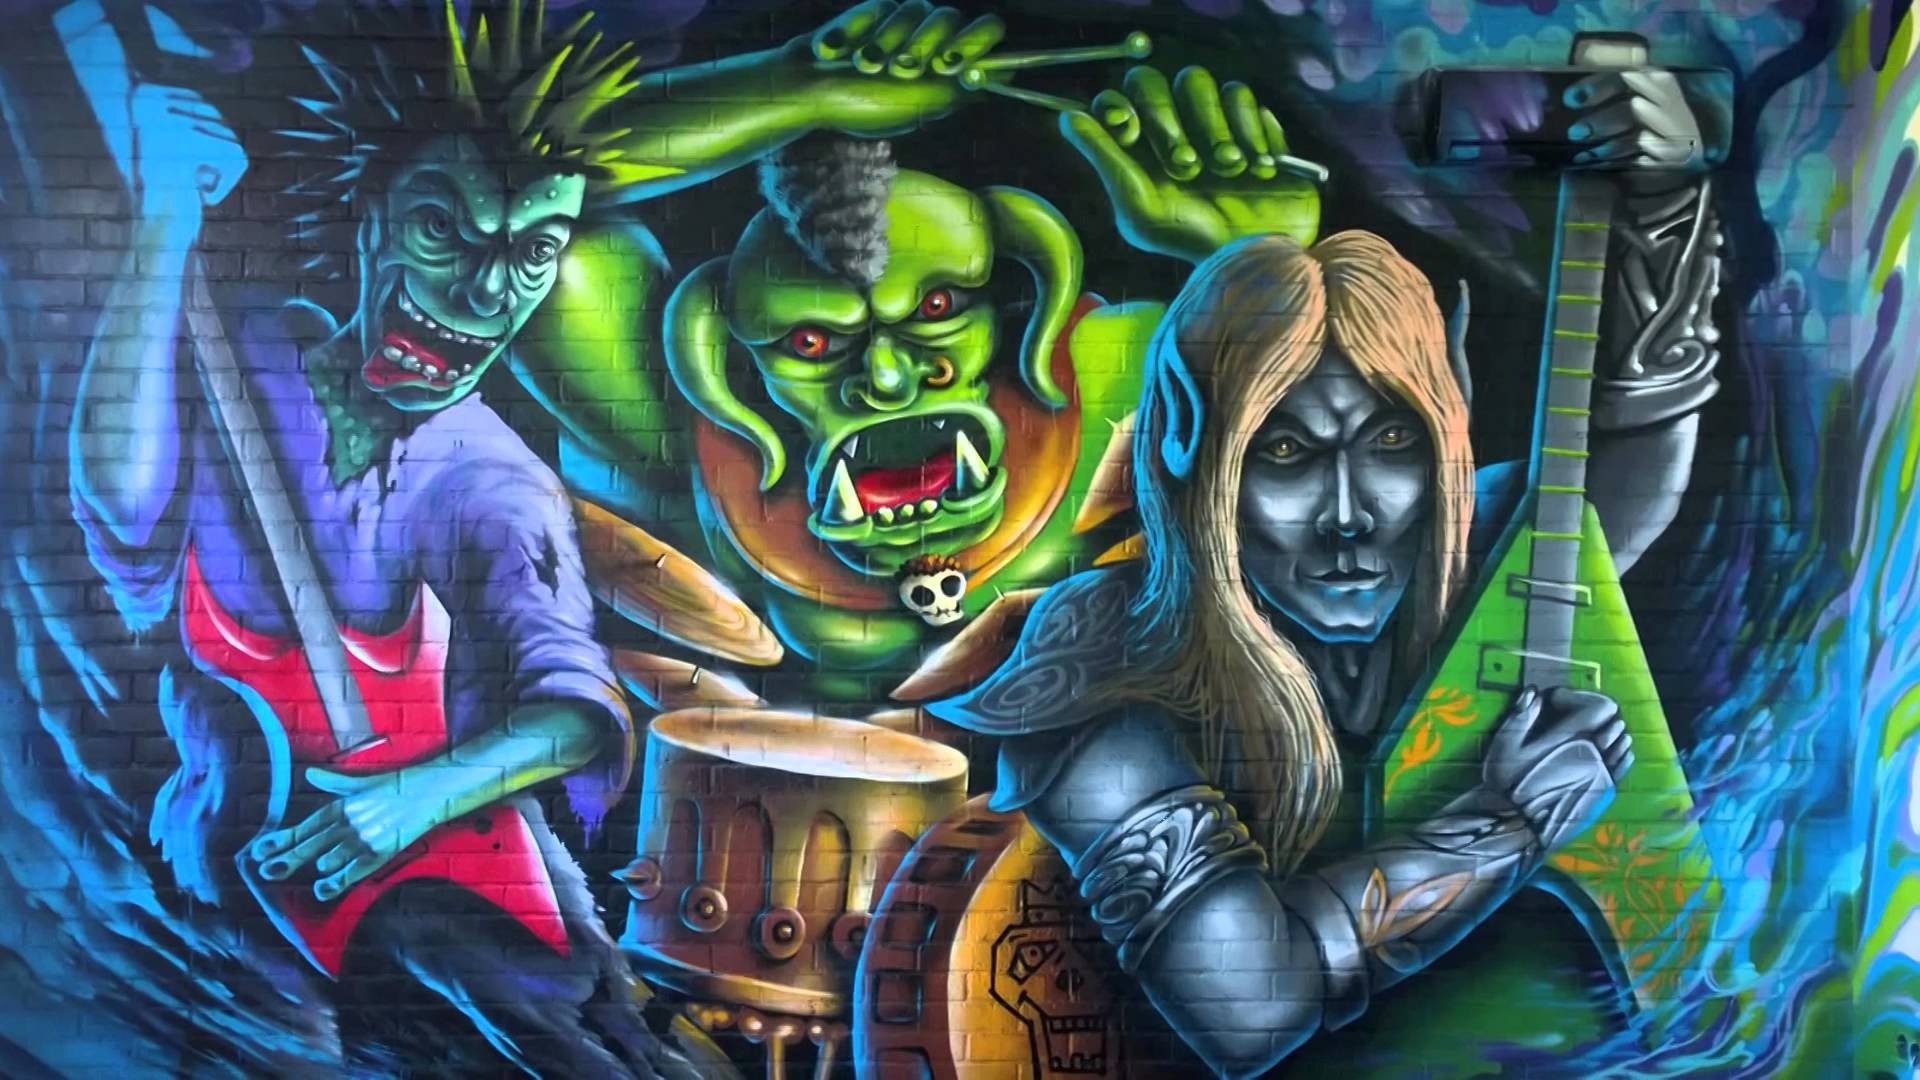 Graffiti Characters Wallpaper For Desktop with image resolution 1920x1080 pixel. You can use this wallpaper as background for your desktop Computer Screensavers, Android or iPhone smartphones